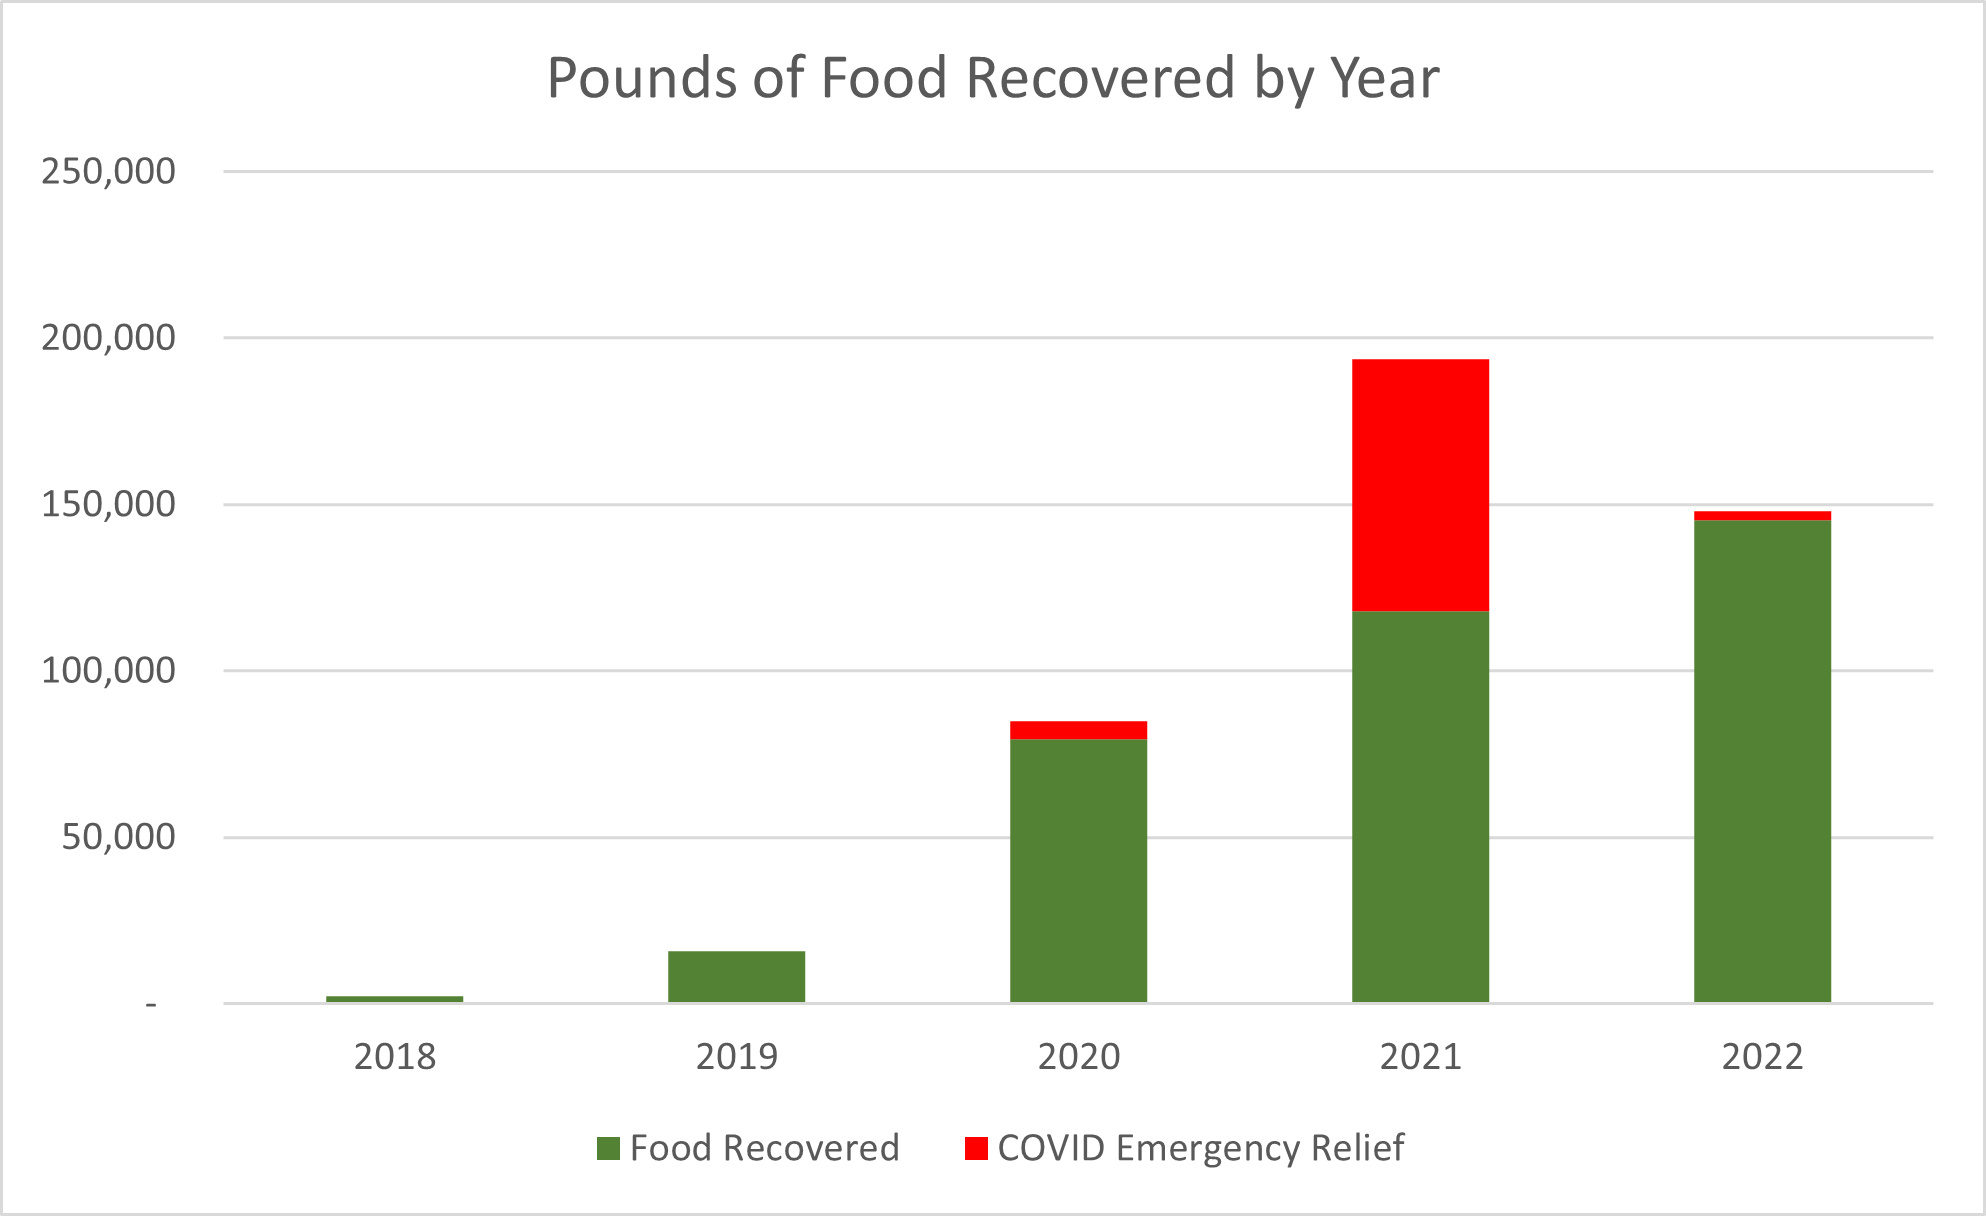 Graph of Meals distributed by year